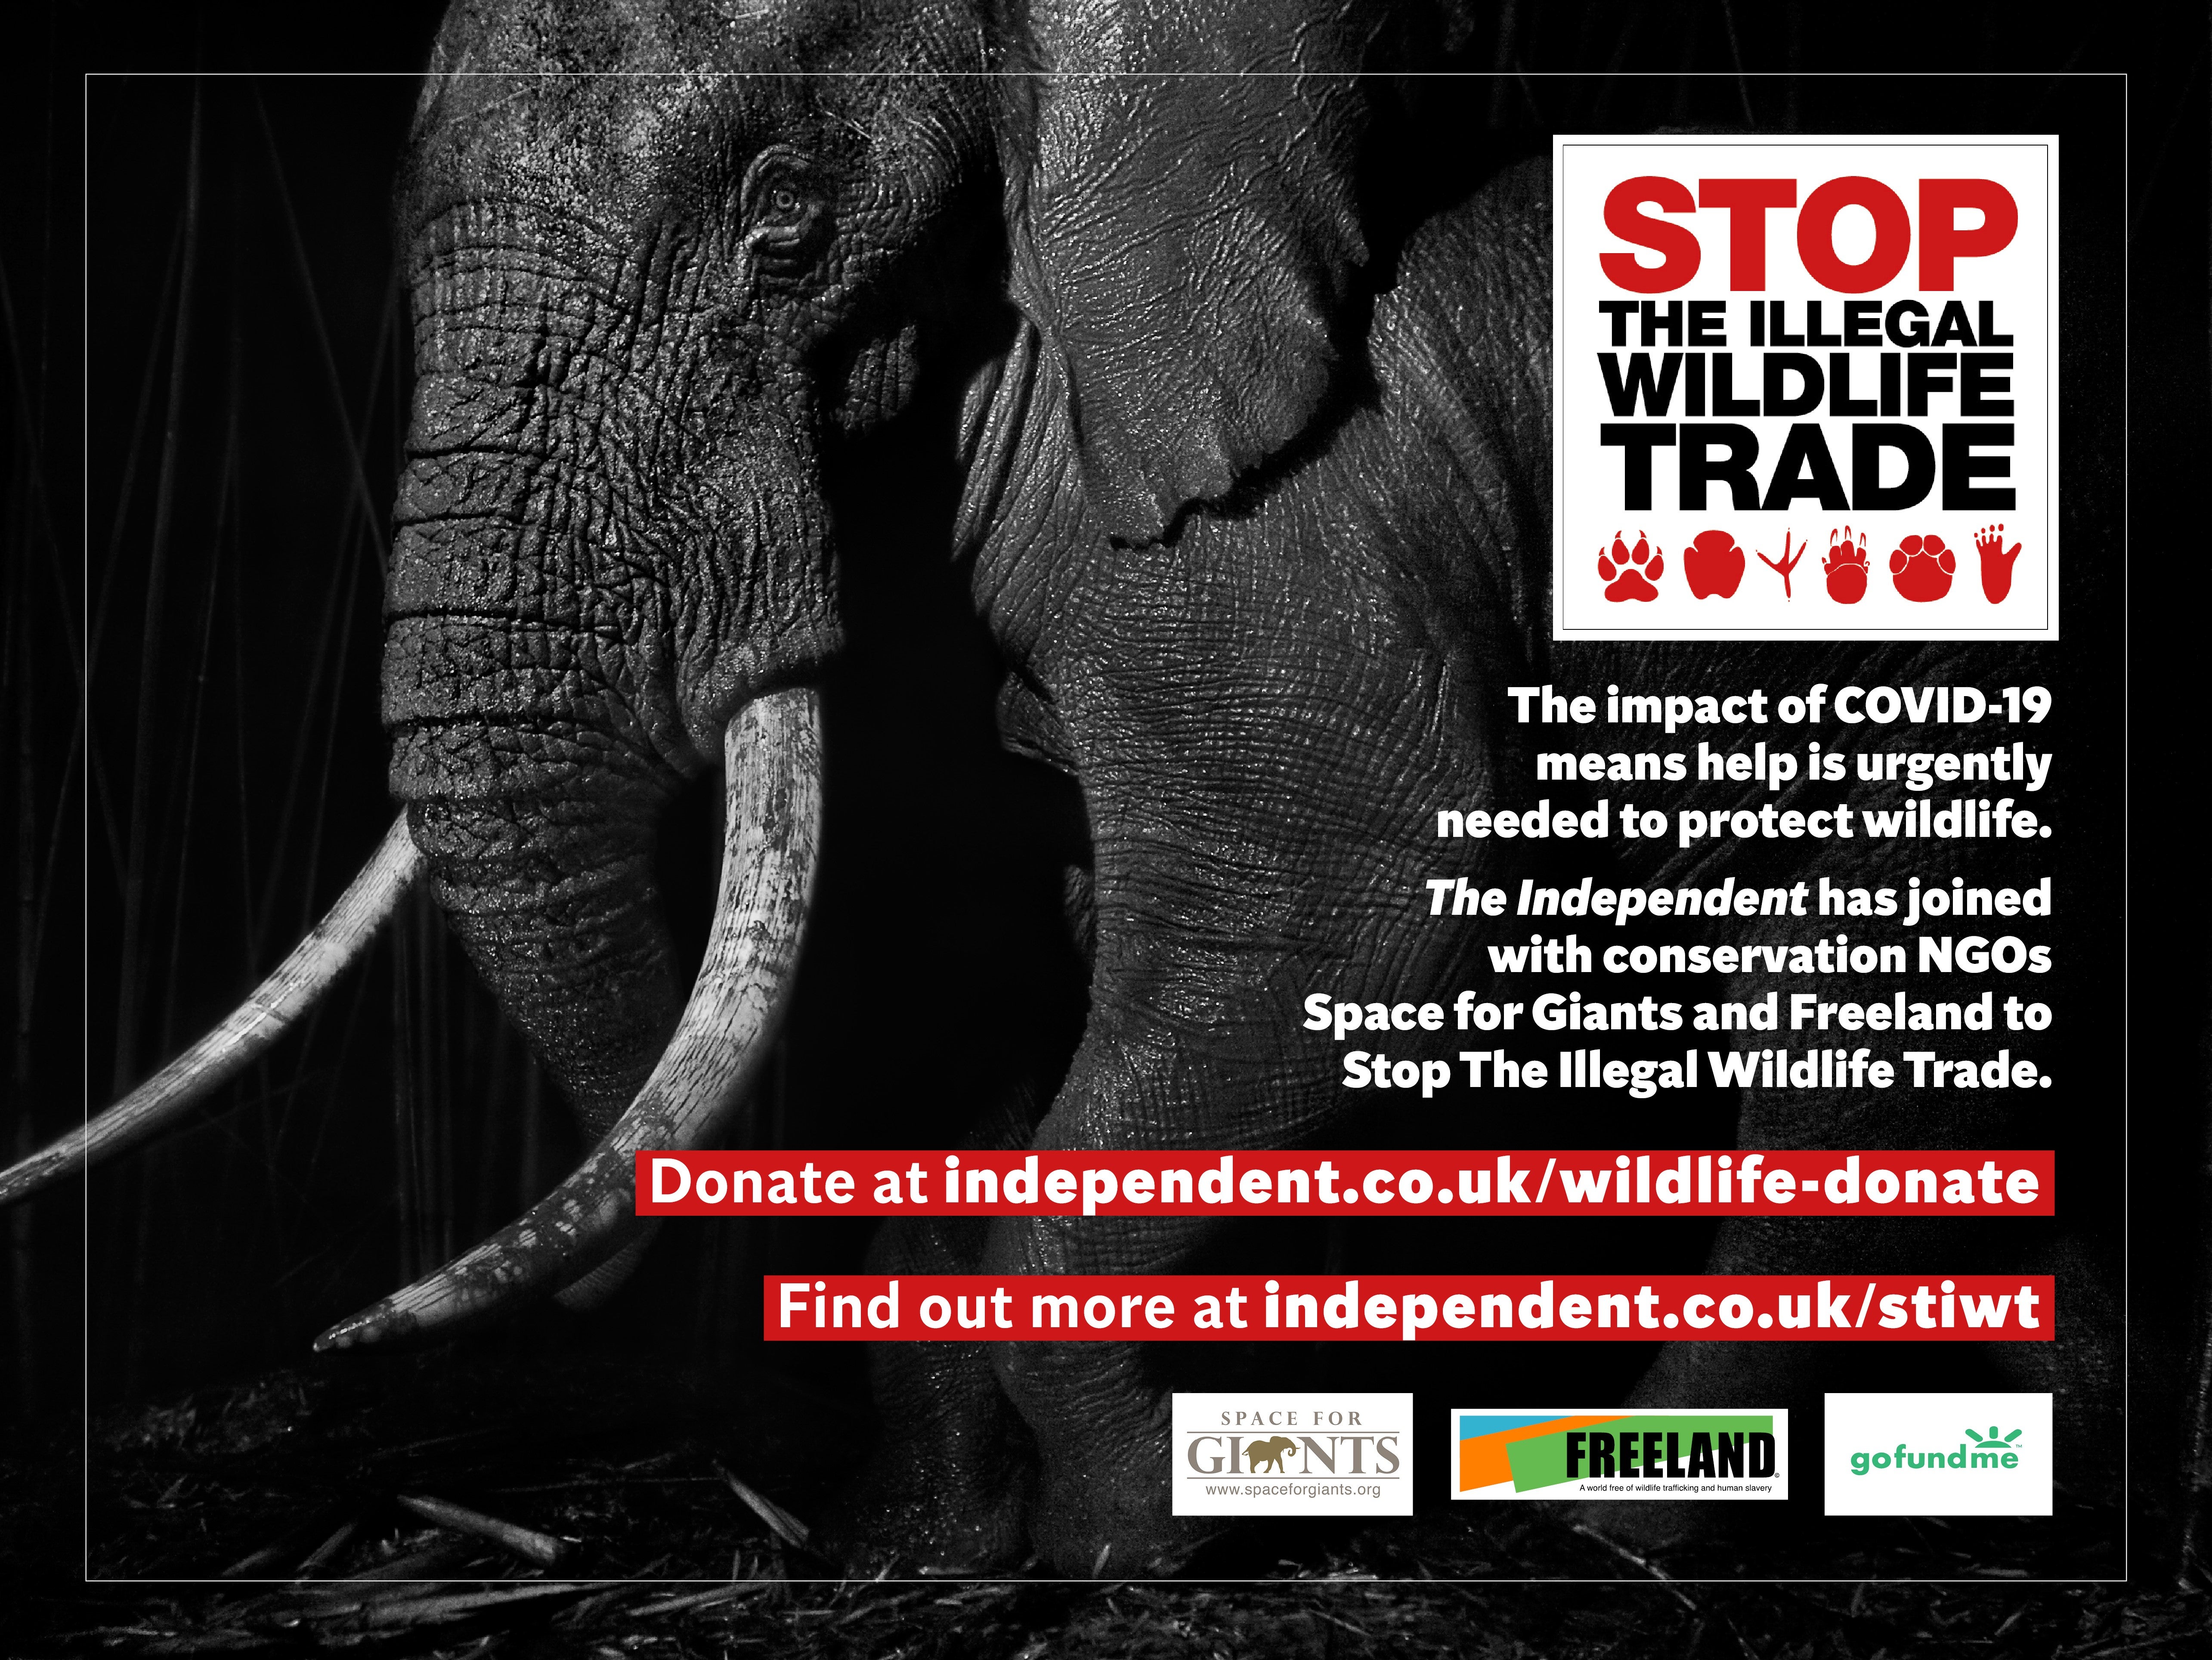 You can donate to The Independent’s campaign to Stop The Illegal Wildlife Trade here